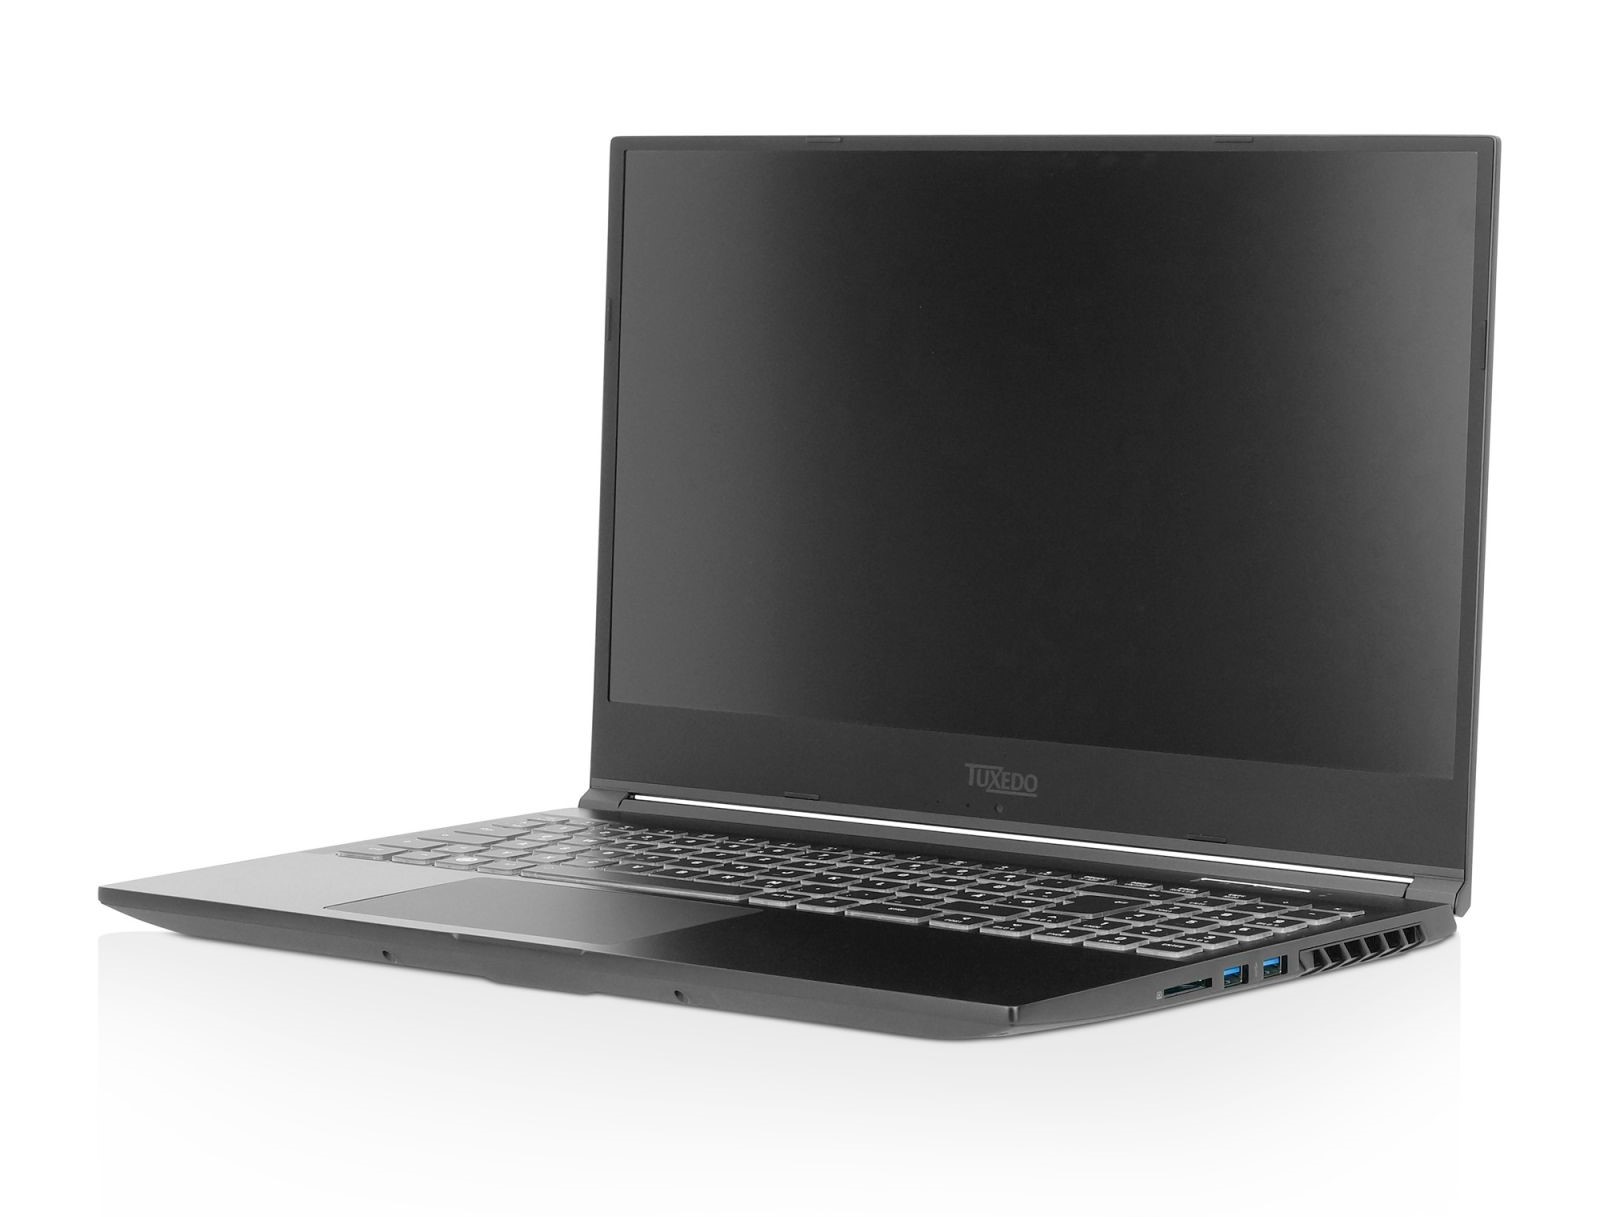 Acer Readies One of the First Laptops to Support Wi-Fi 7